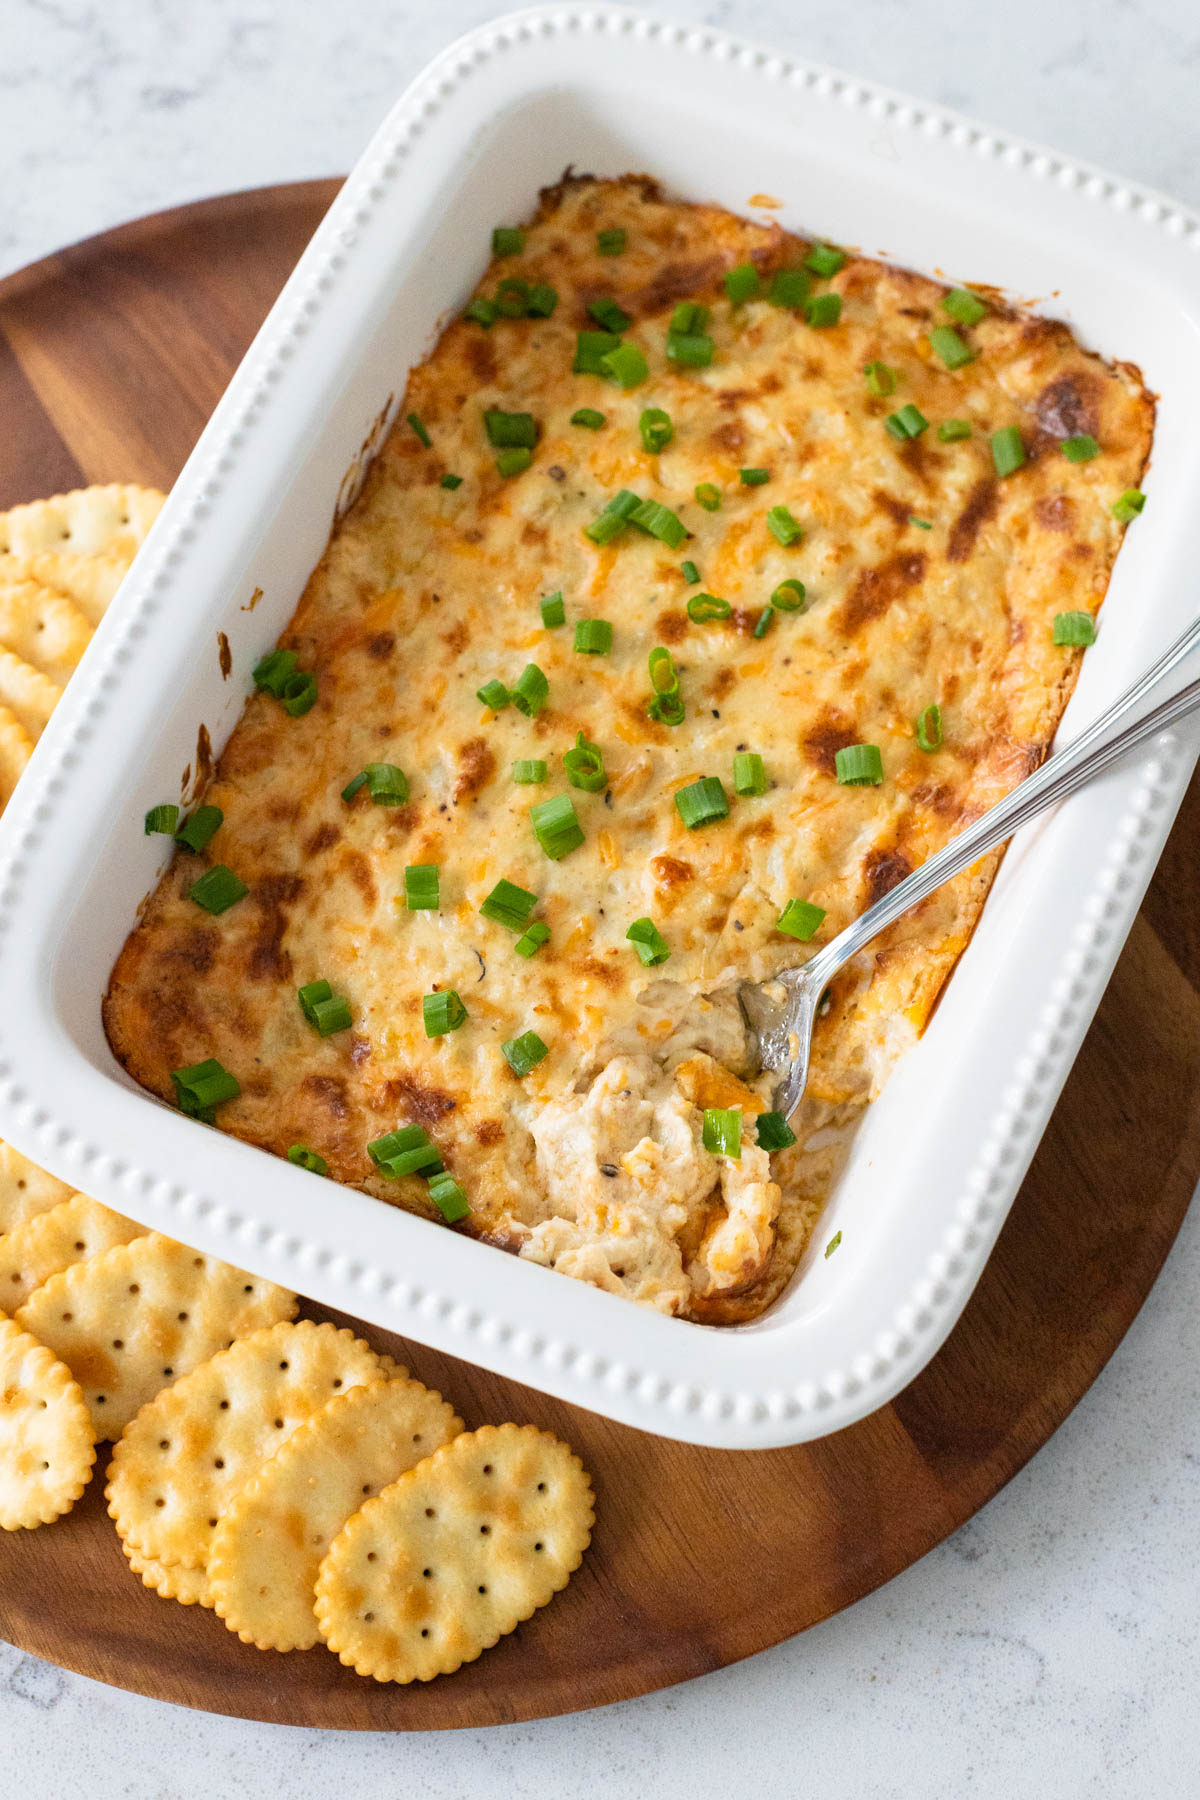 The baking dish of hot crab dip is being served on a platter with butter crackers.